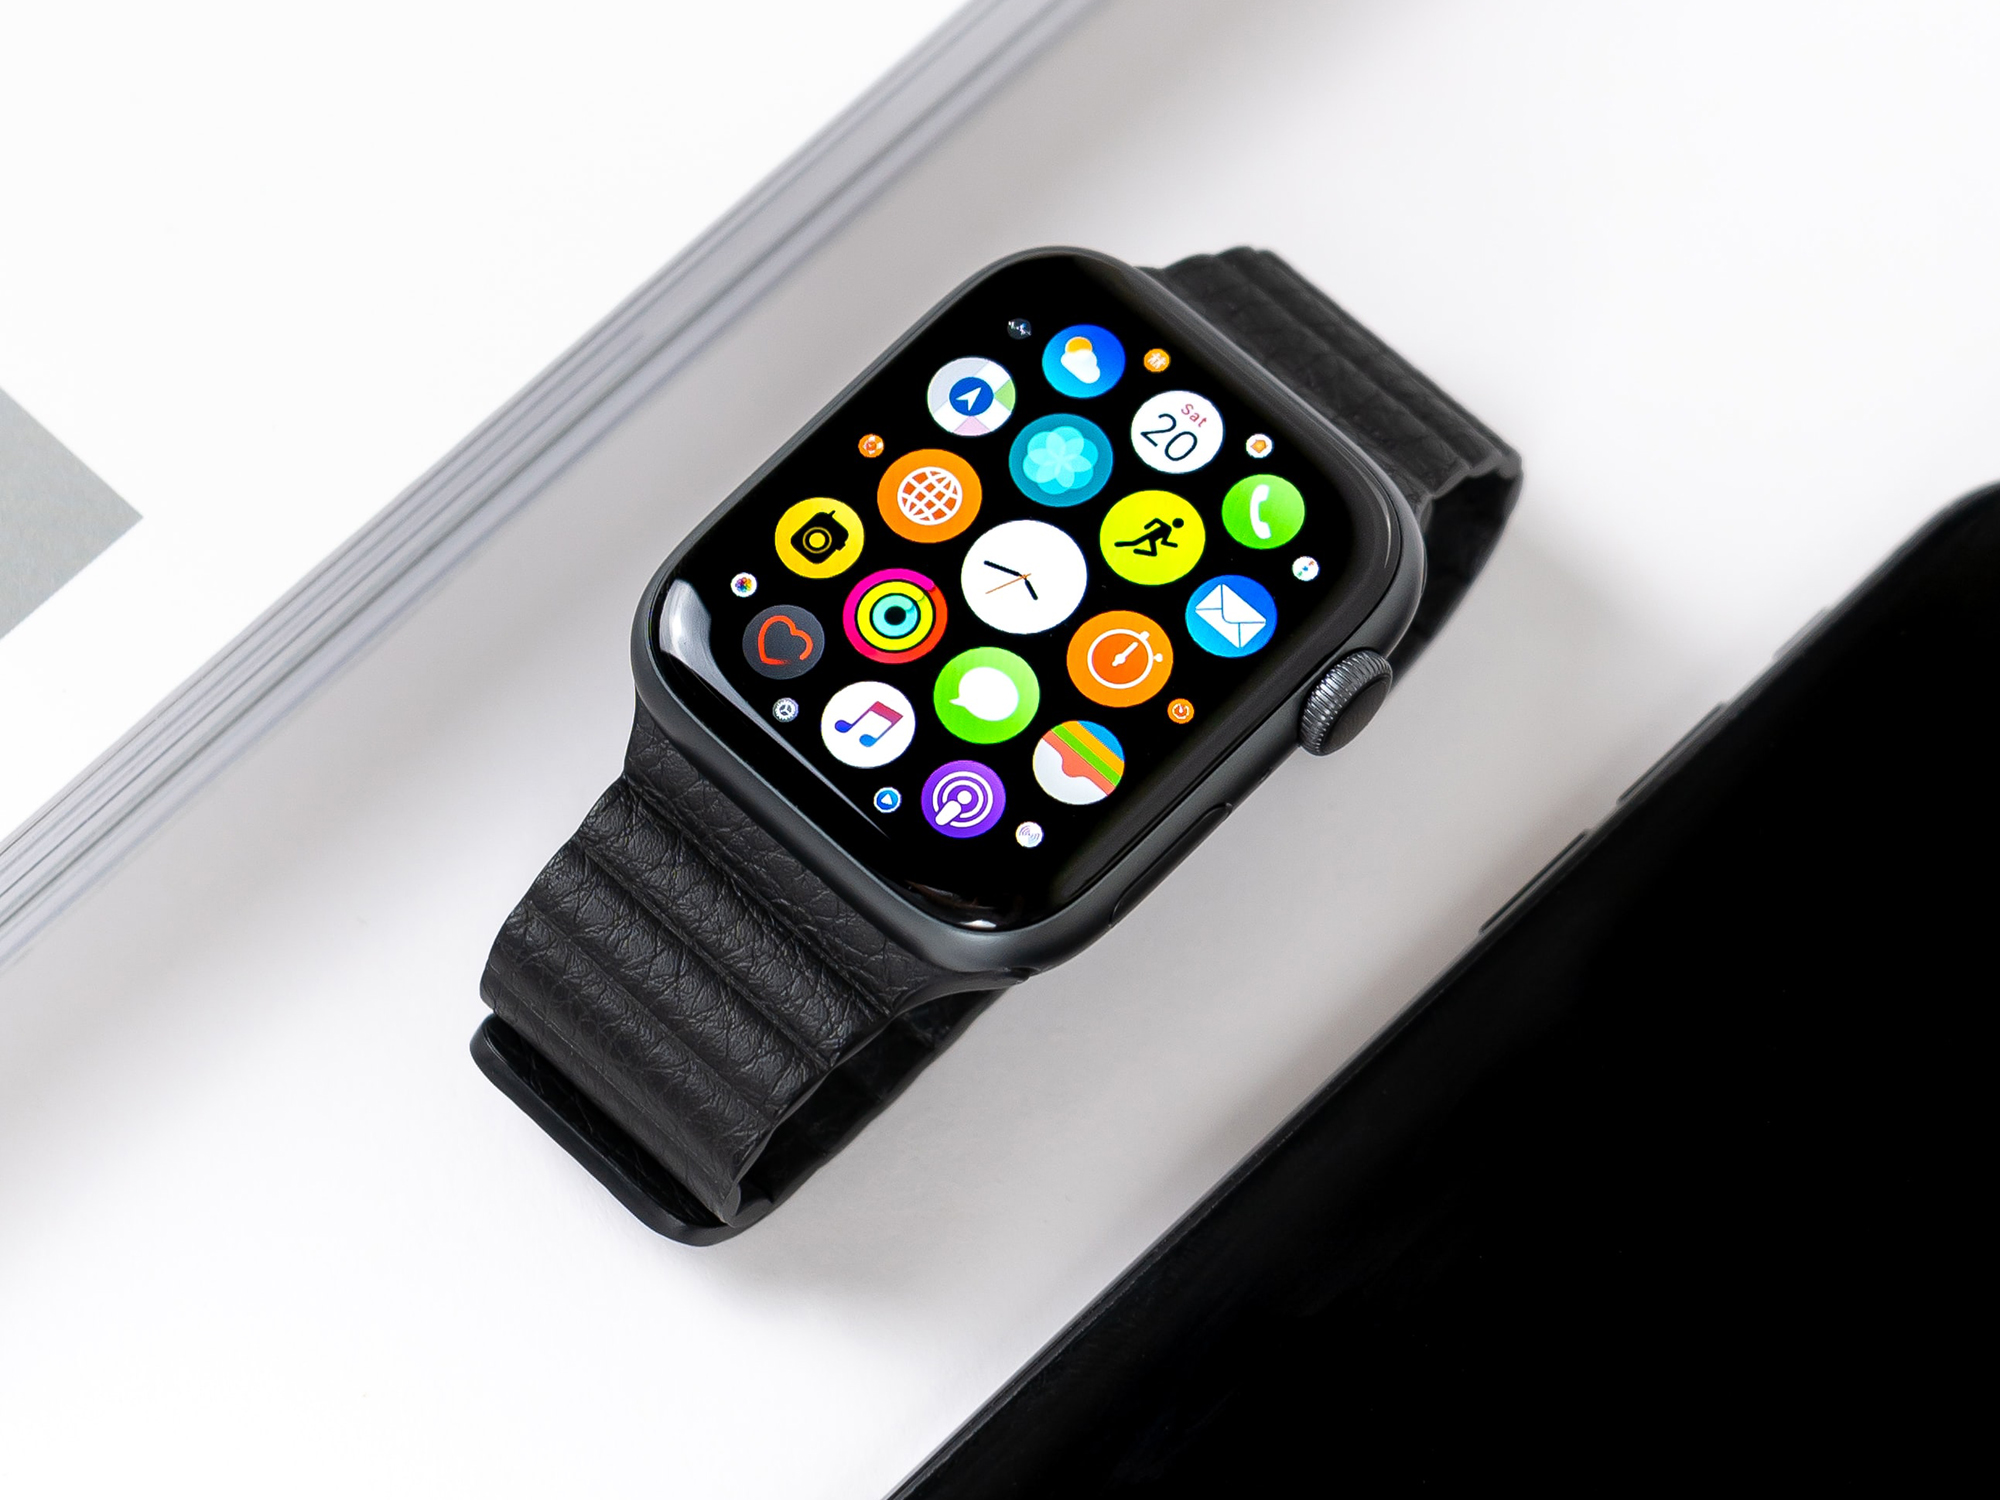 Apple Watch Apps Begin Showing Up in the App Store Ahead of Apple